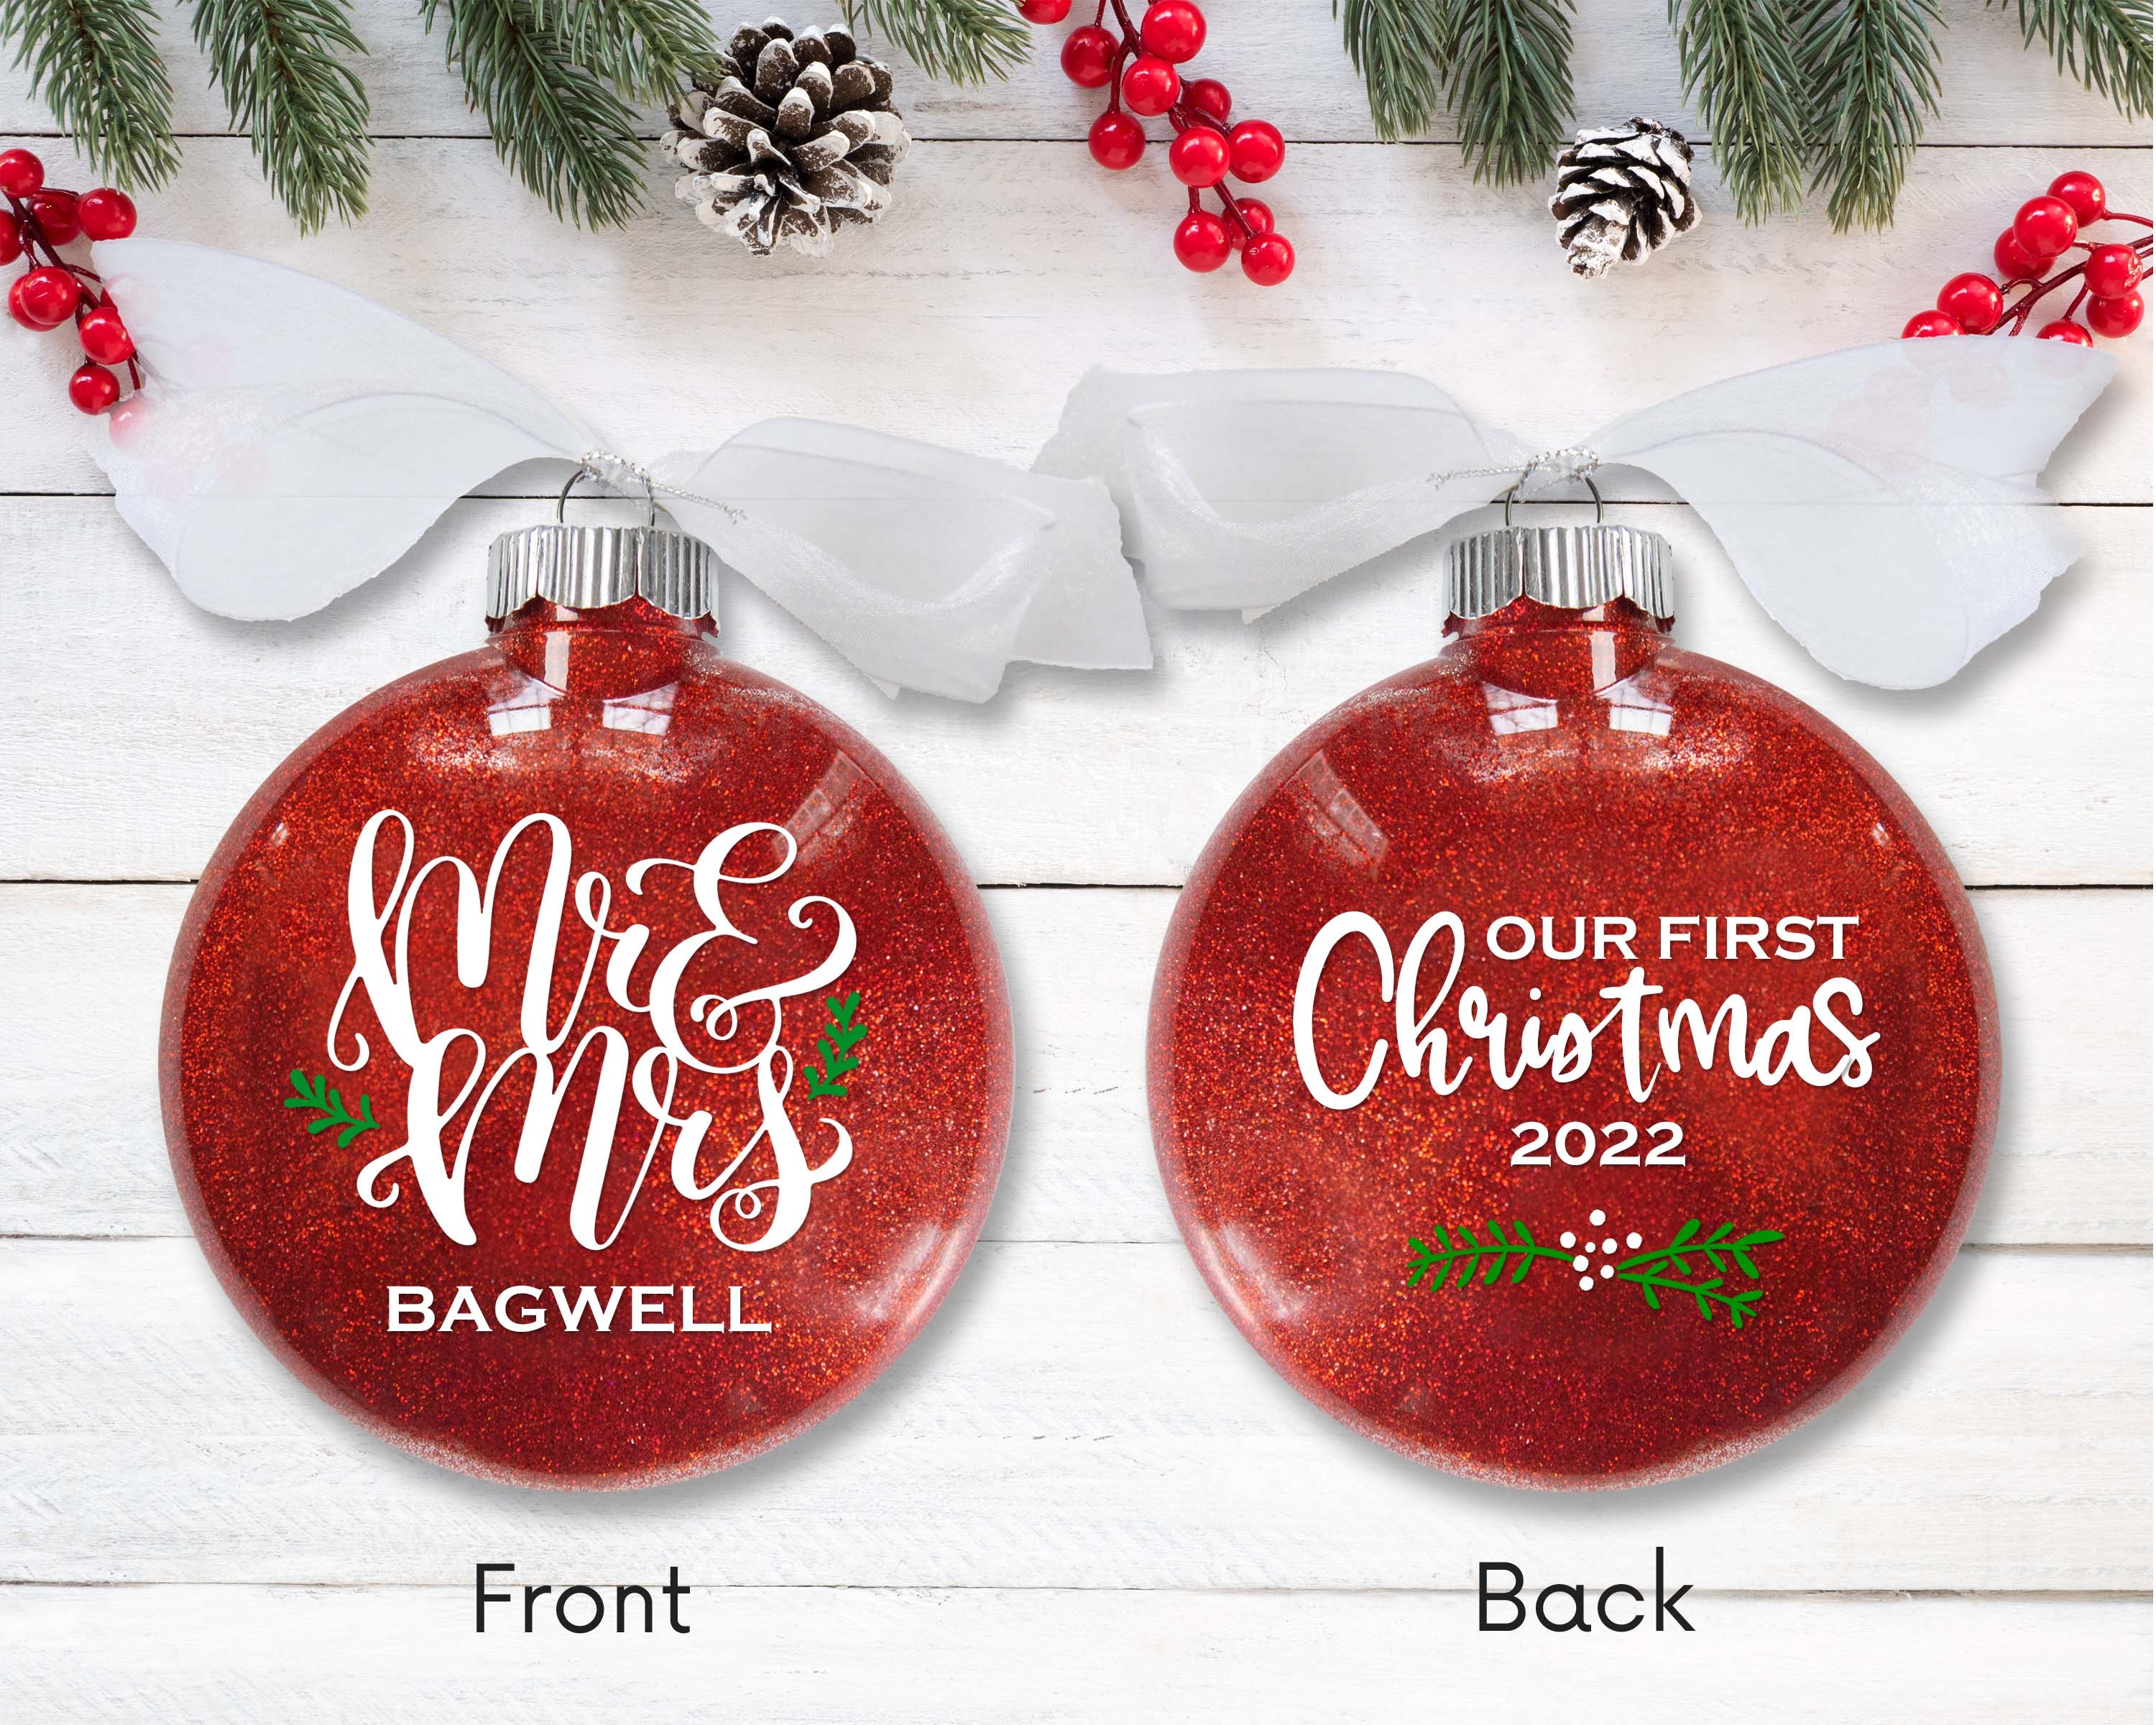 personalised Christmas decoration gift for 1st first Christmas married as mr&mrs 